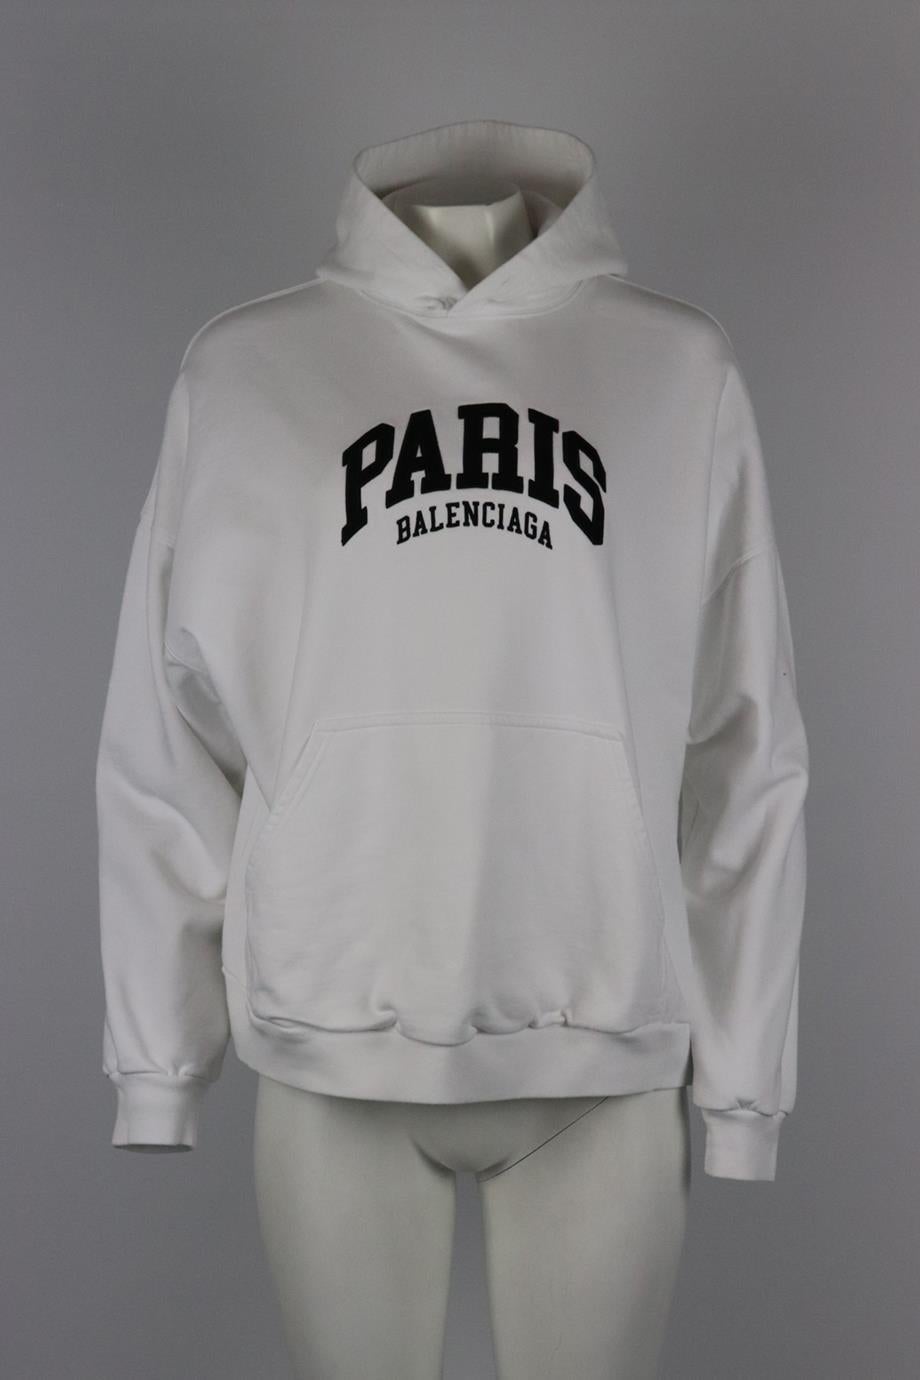 Balenciaga logo embroidered cotton jersey hoodie. White and black. Long sleeve, crewneck. Slips on. 100% Cotton; embroidery: 55% cotton, 45% polyester. Size: Large (UK 12, US 8, FR 40, IT 44). Bust: 51 in. Waist: 48 in. Hips: 44 in. Length: 24 in.